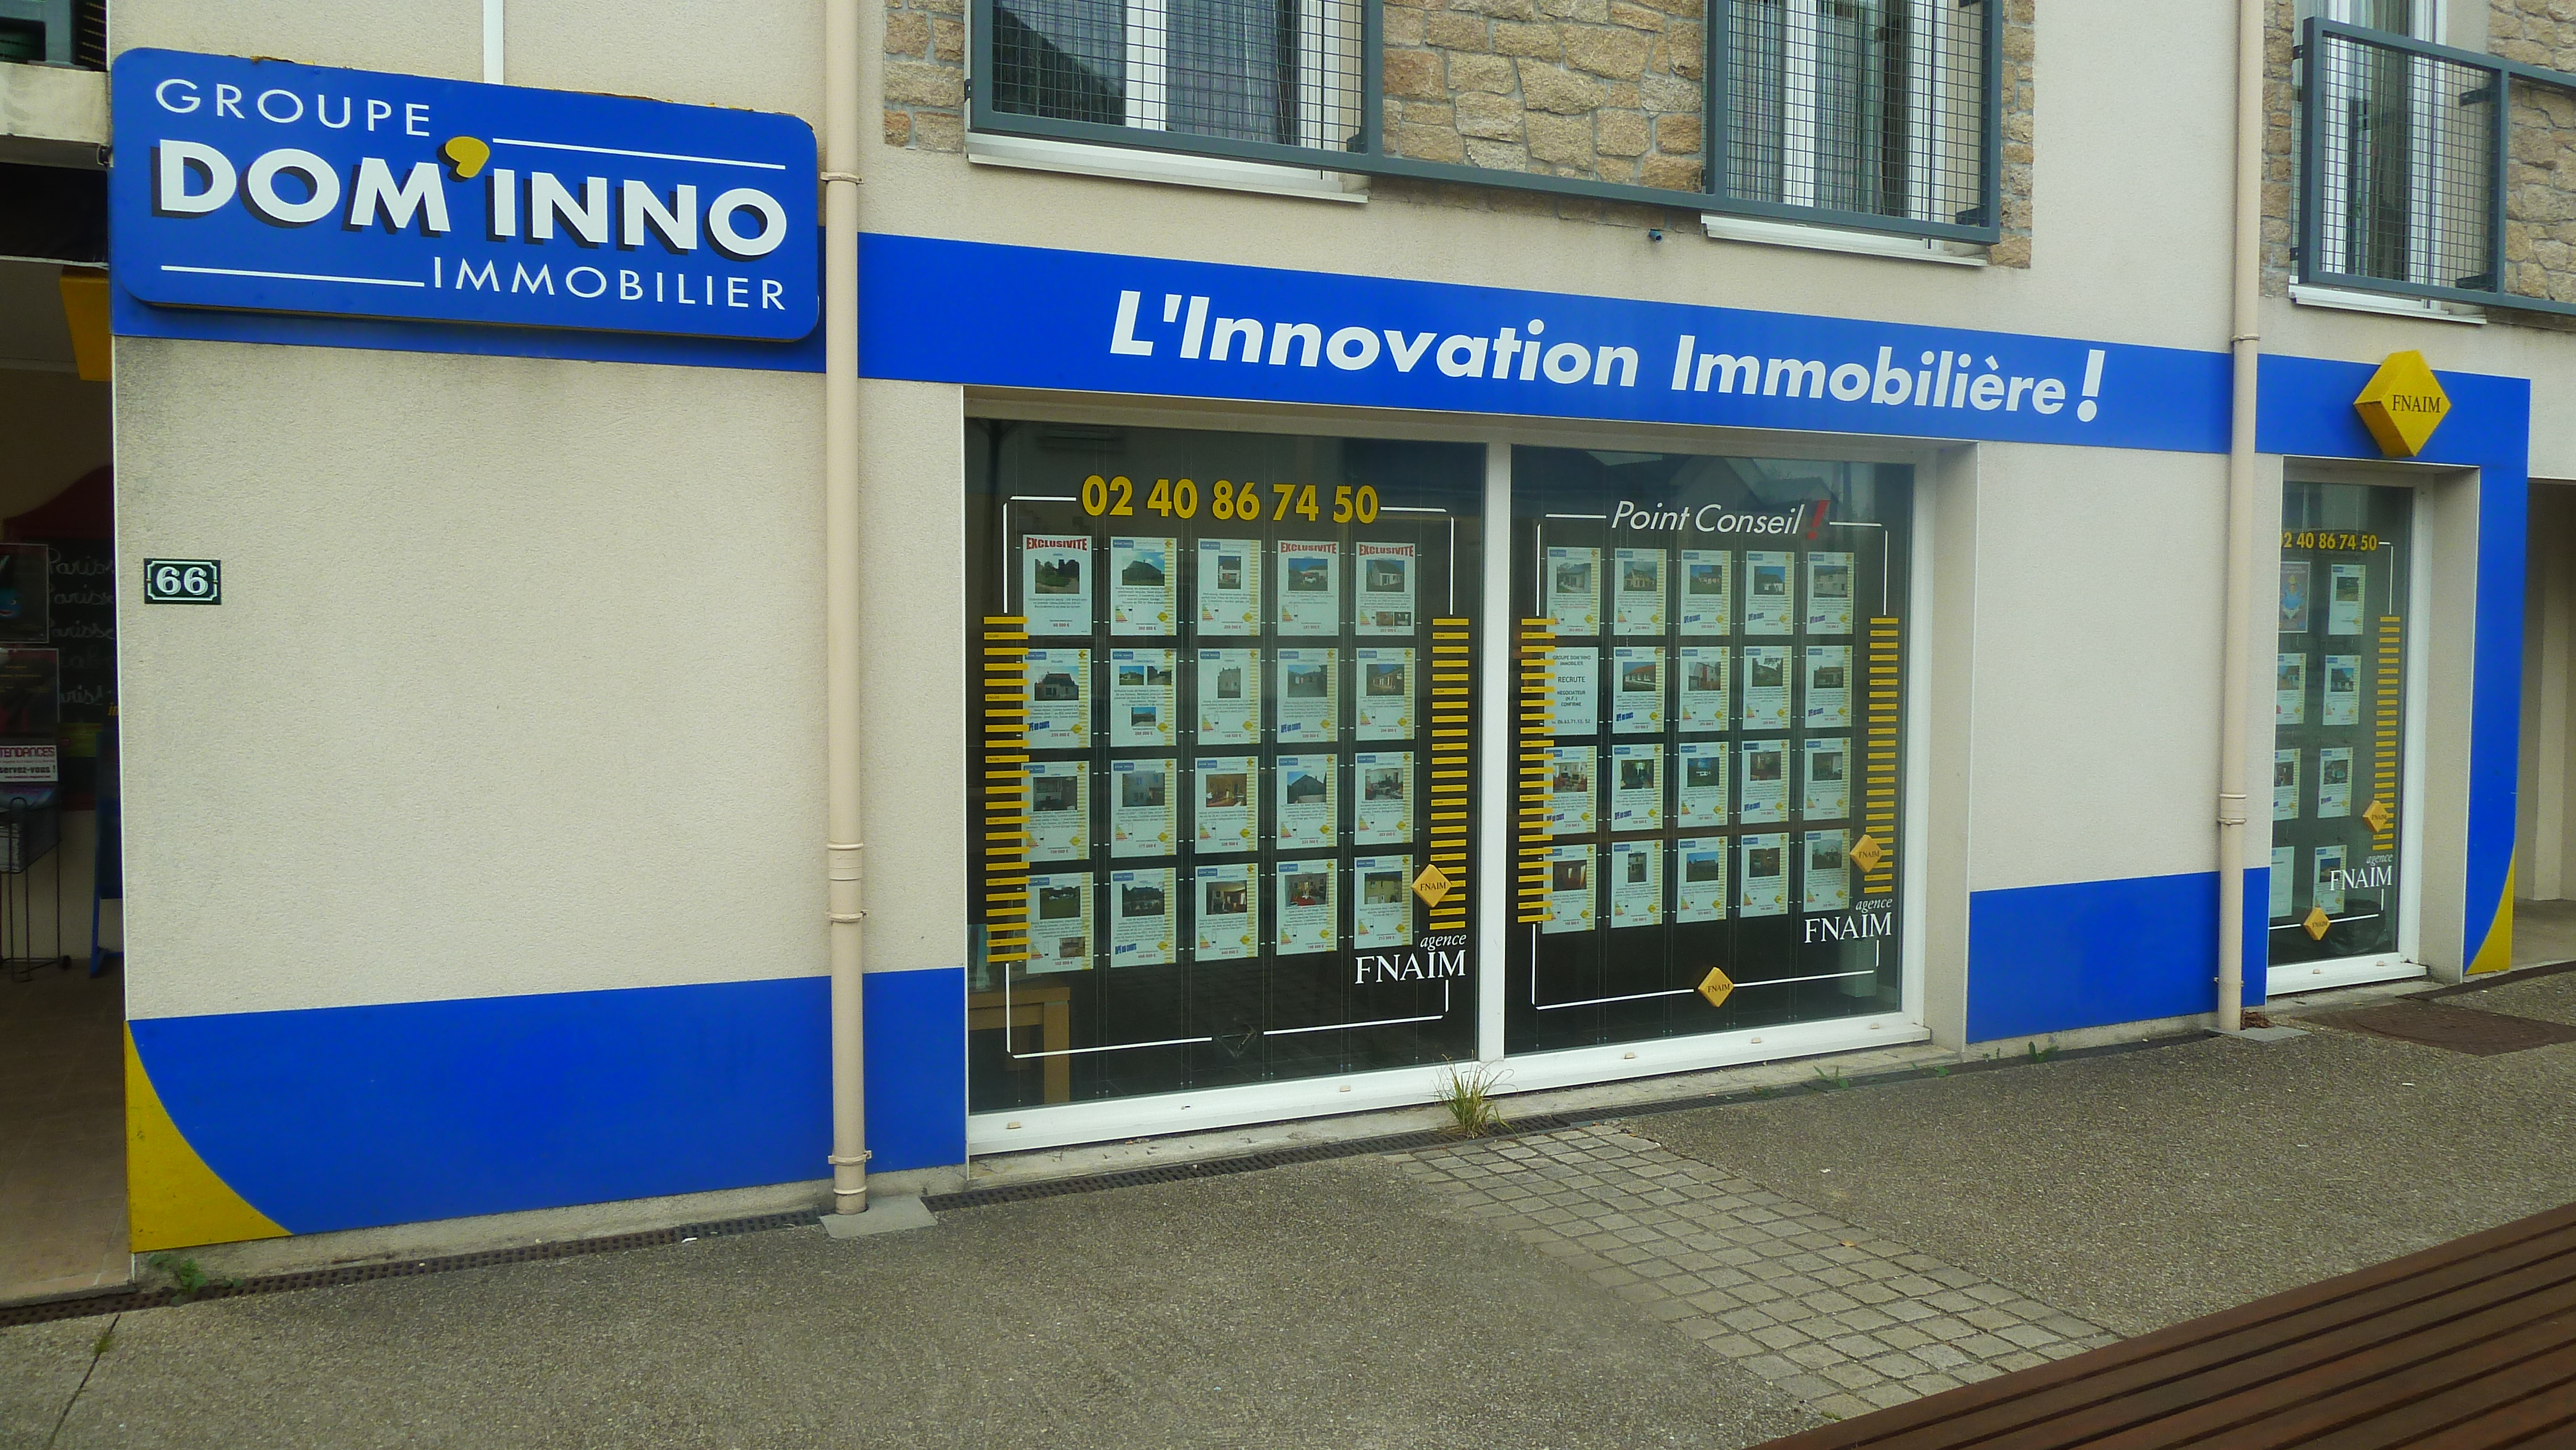 DOM'INNO Immobilier